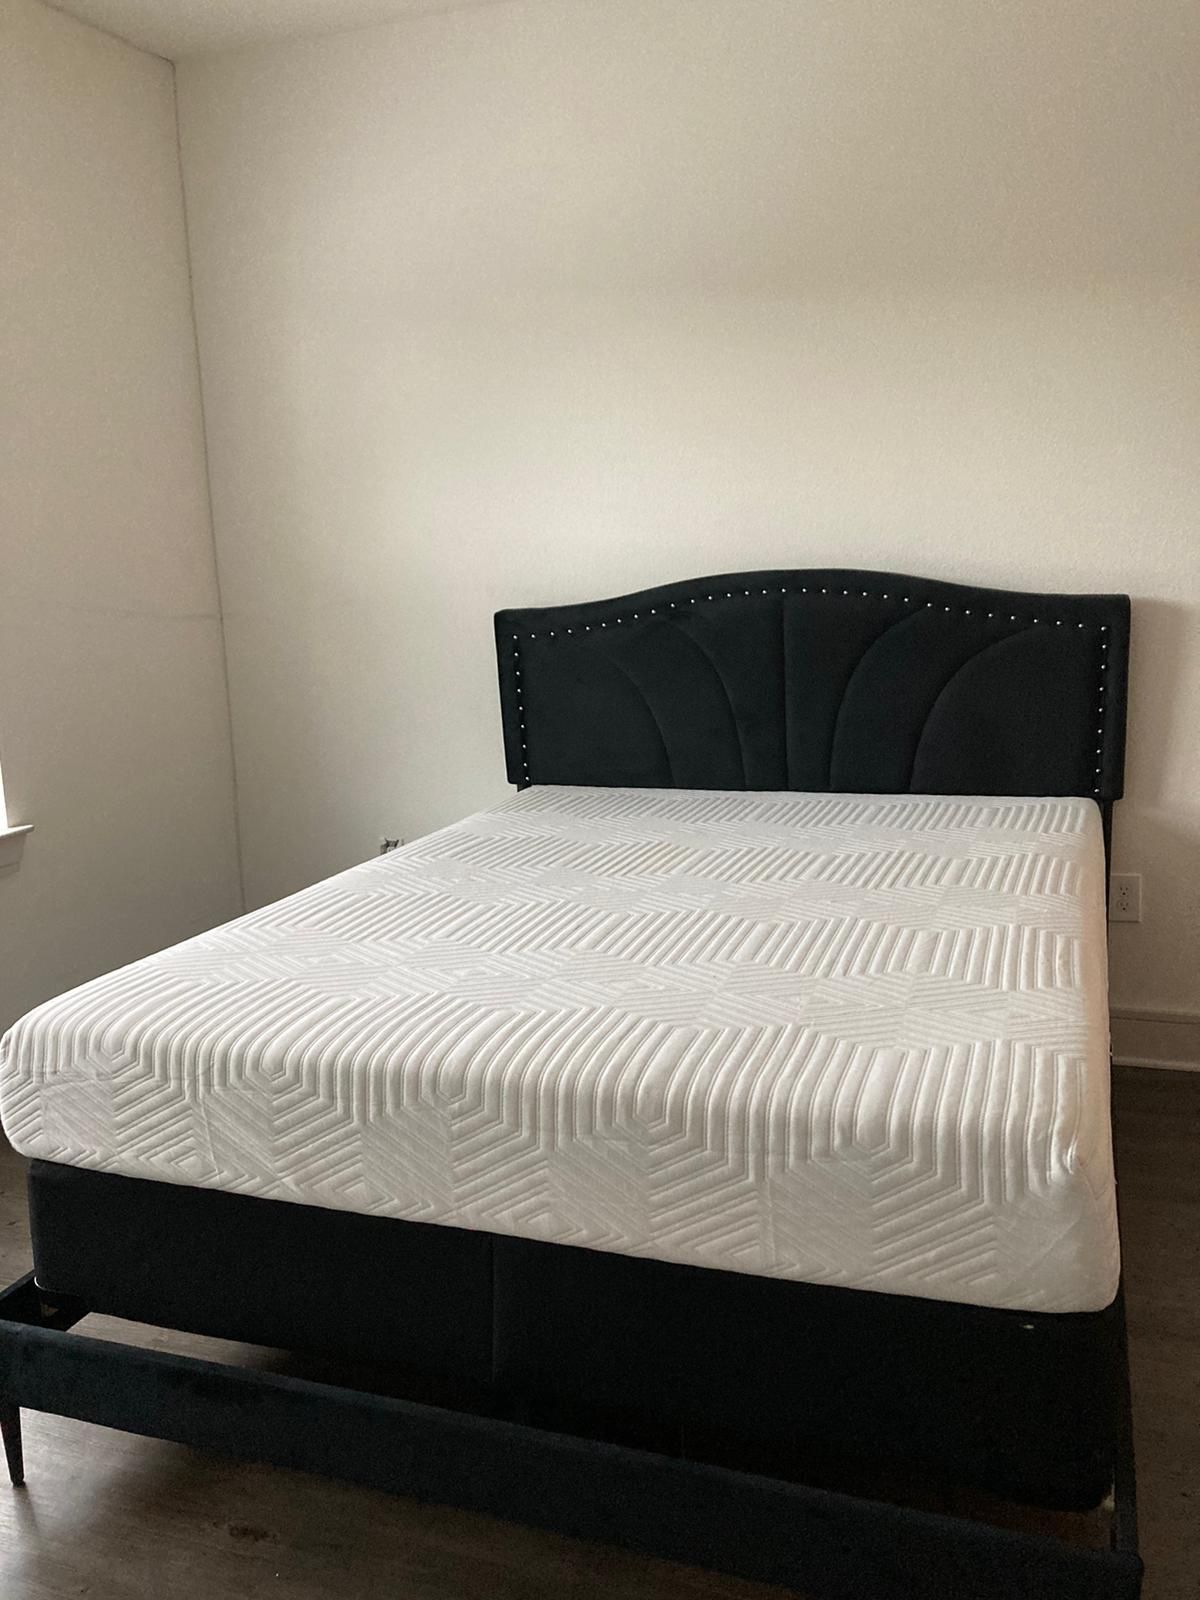 Queen Bed With New Mattress